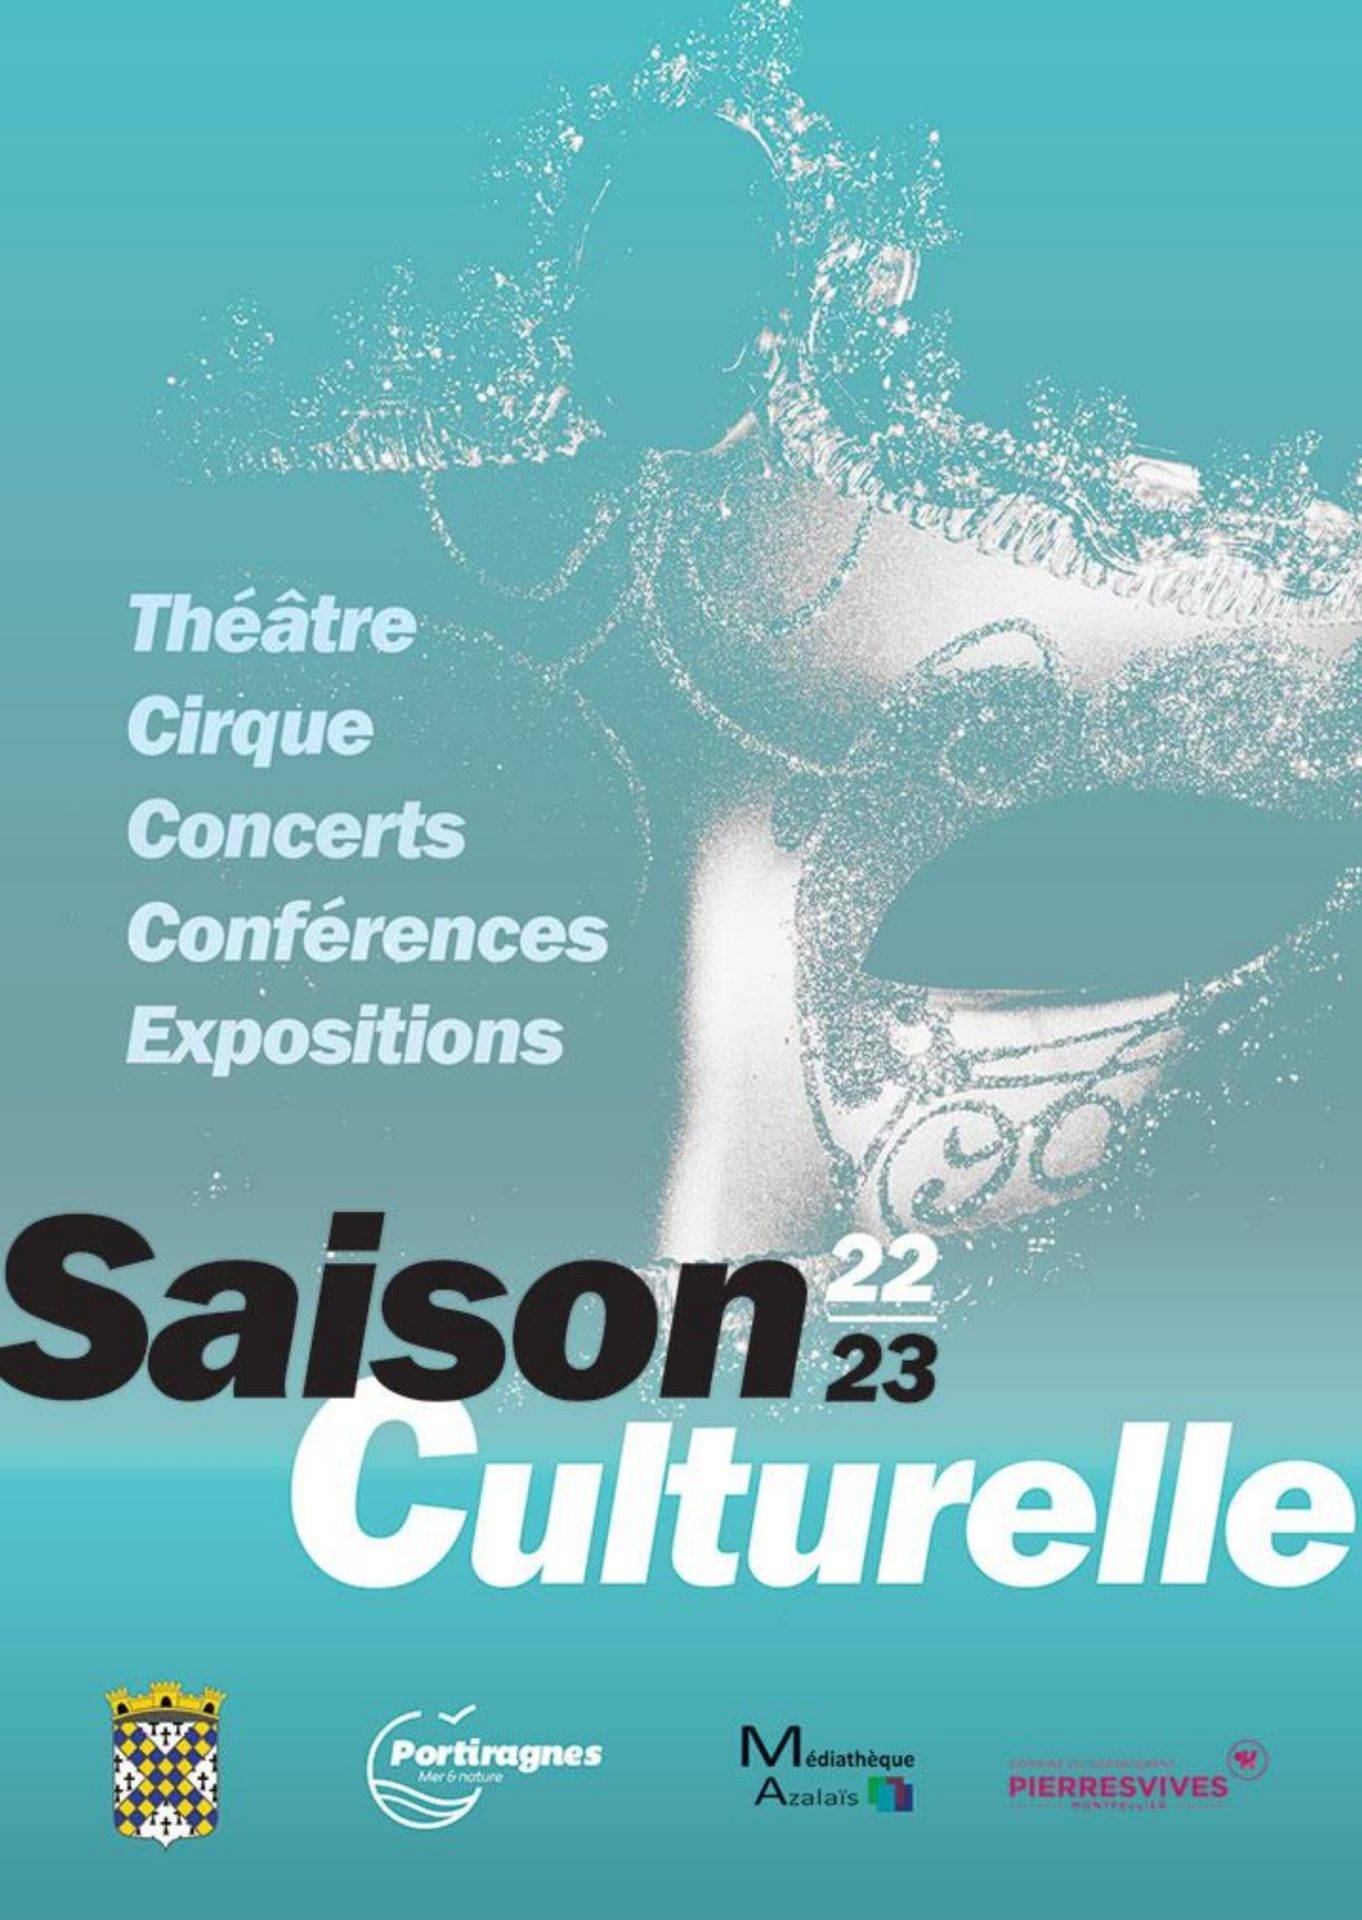 You are currently viewing Saison Culturelle 22/23